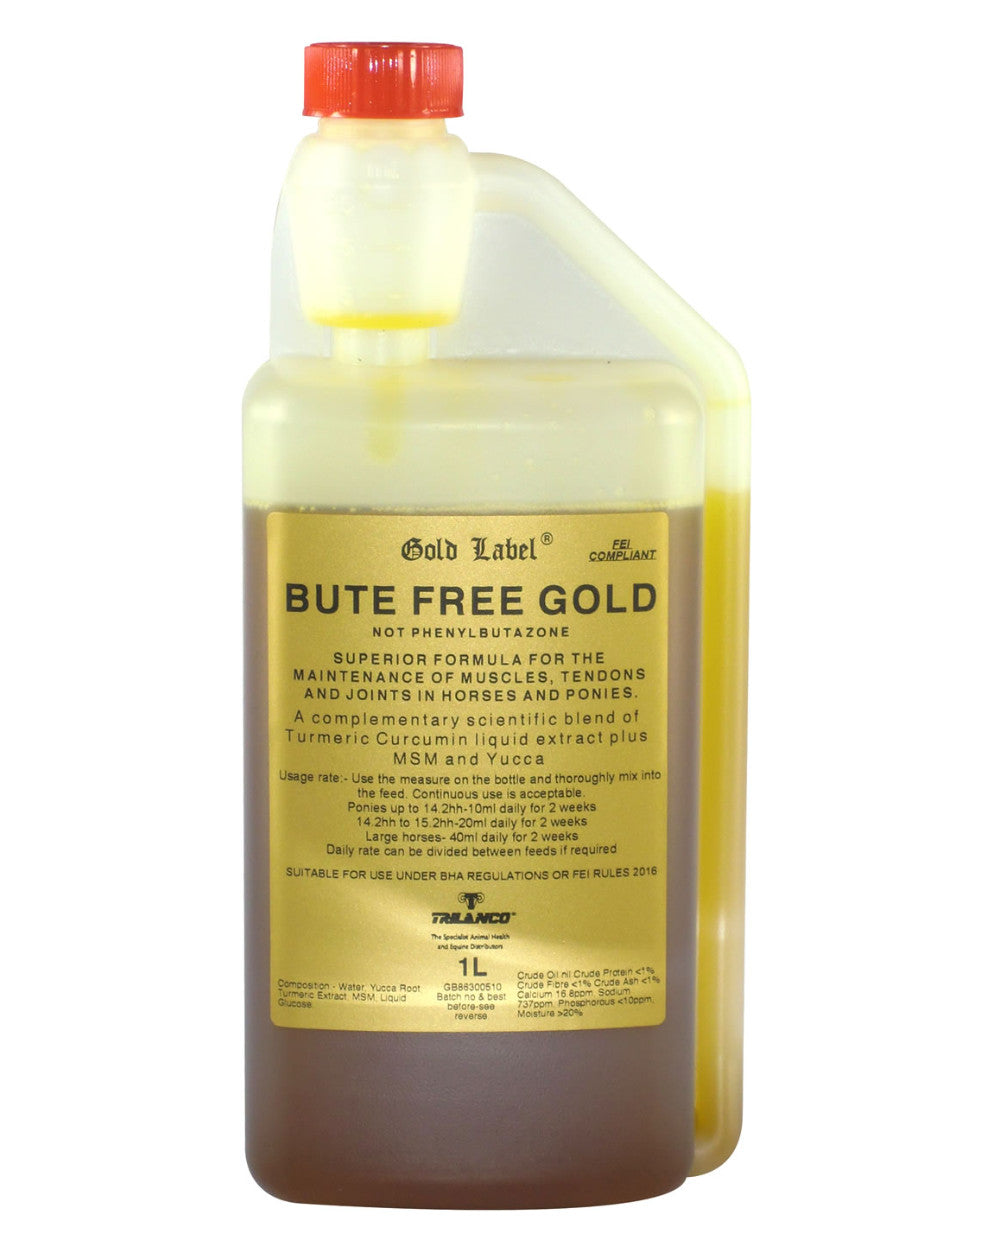 Gold Label Bute Free Gold On A White Background